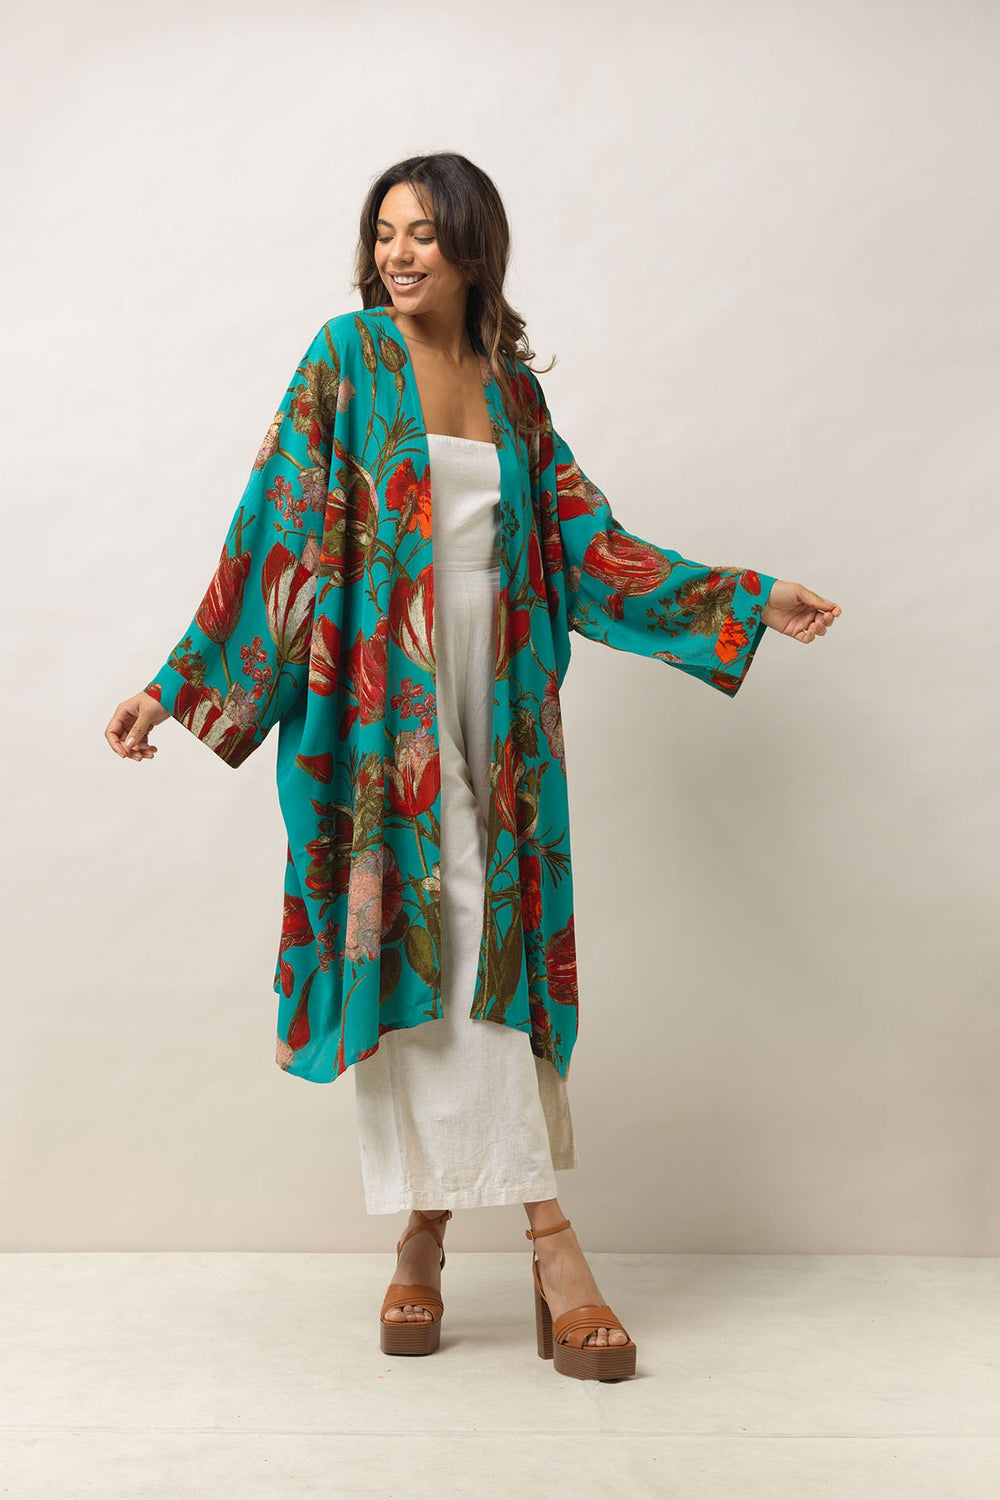 Women's long kimono style jacket in Tulip Blue print by One Hundred Stars